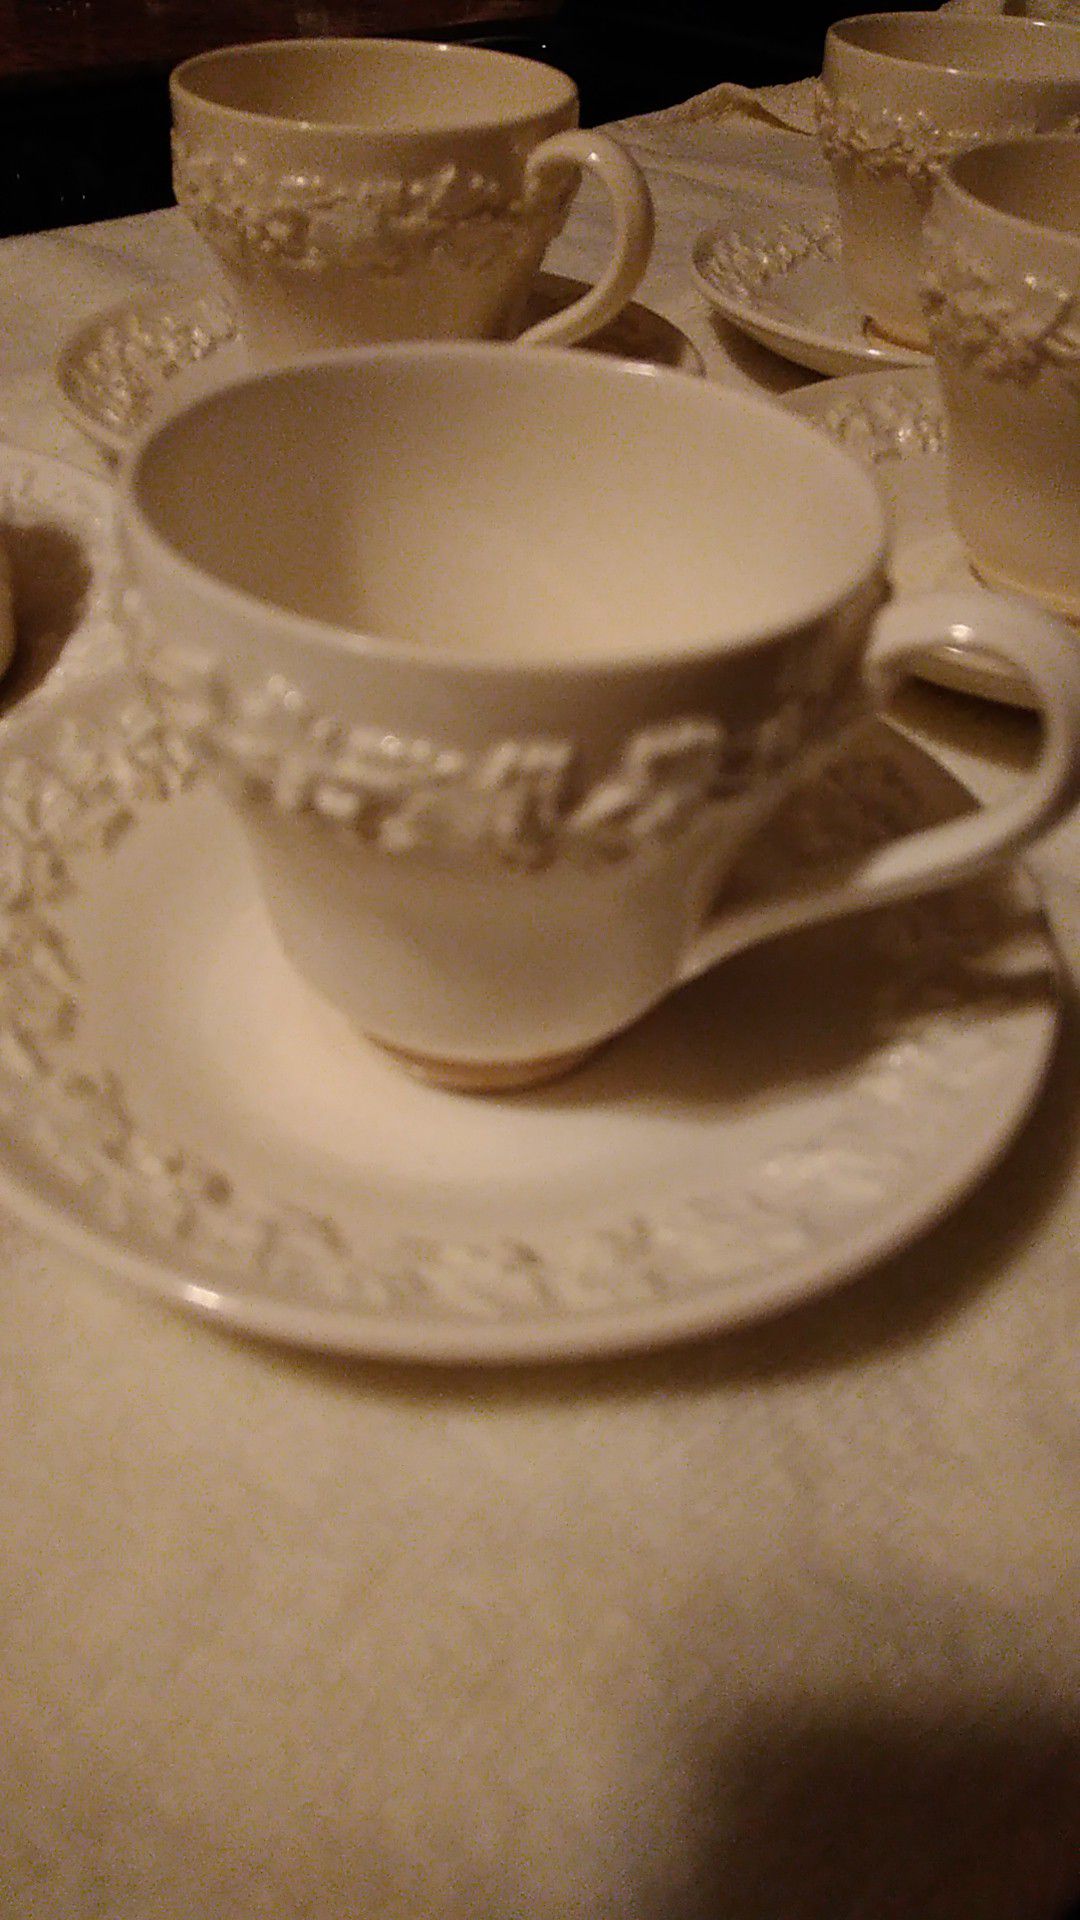 Wedgewood Queensware Demitasse 5 cups and saucers